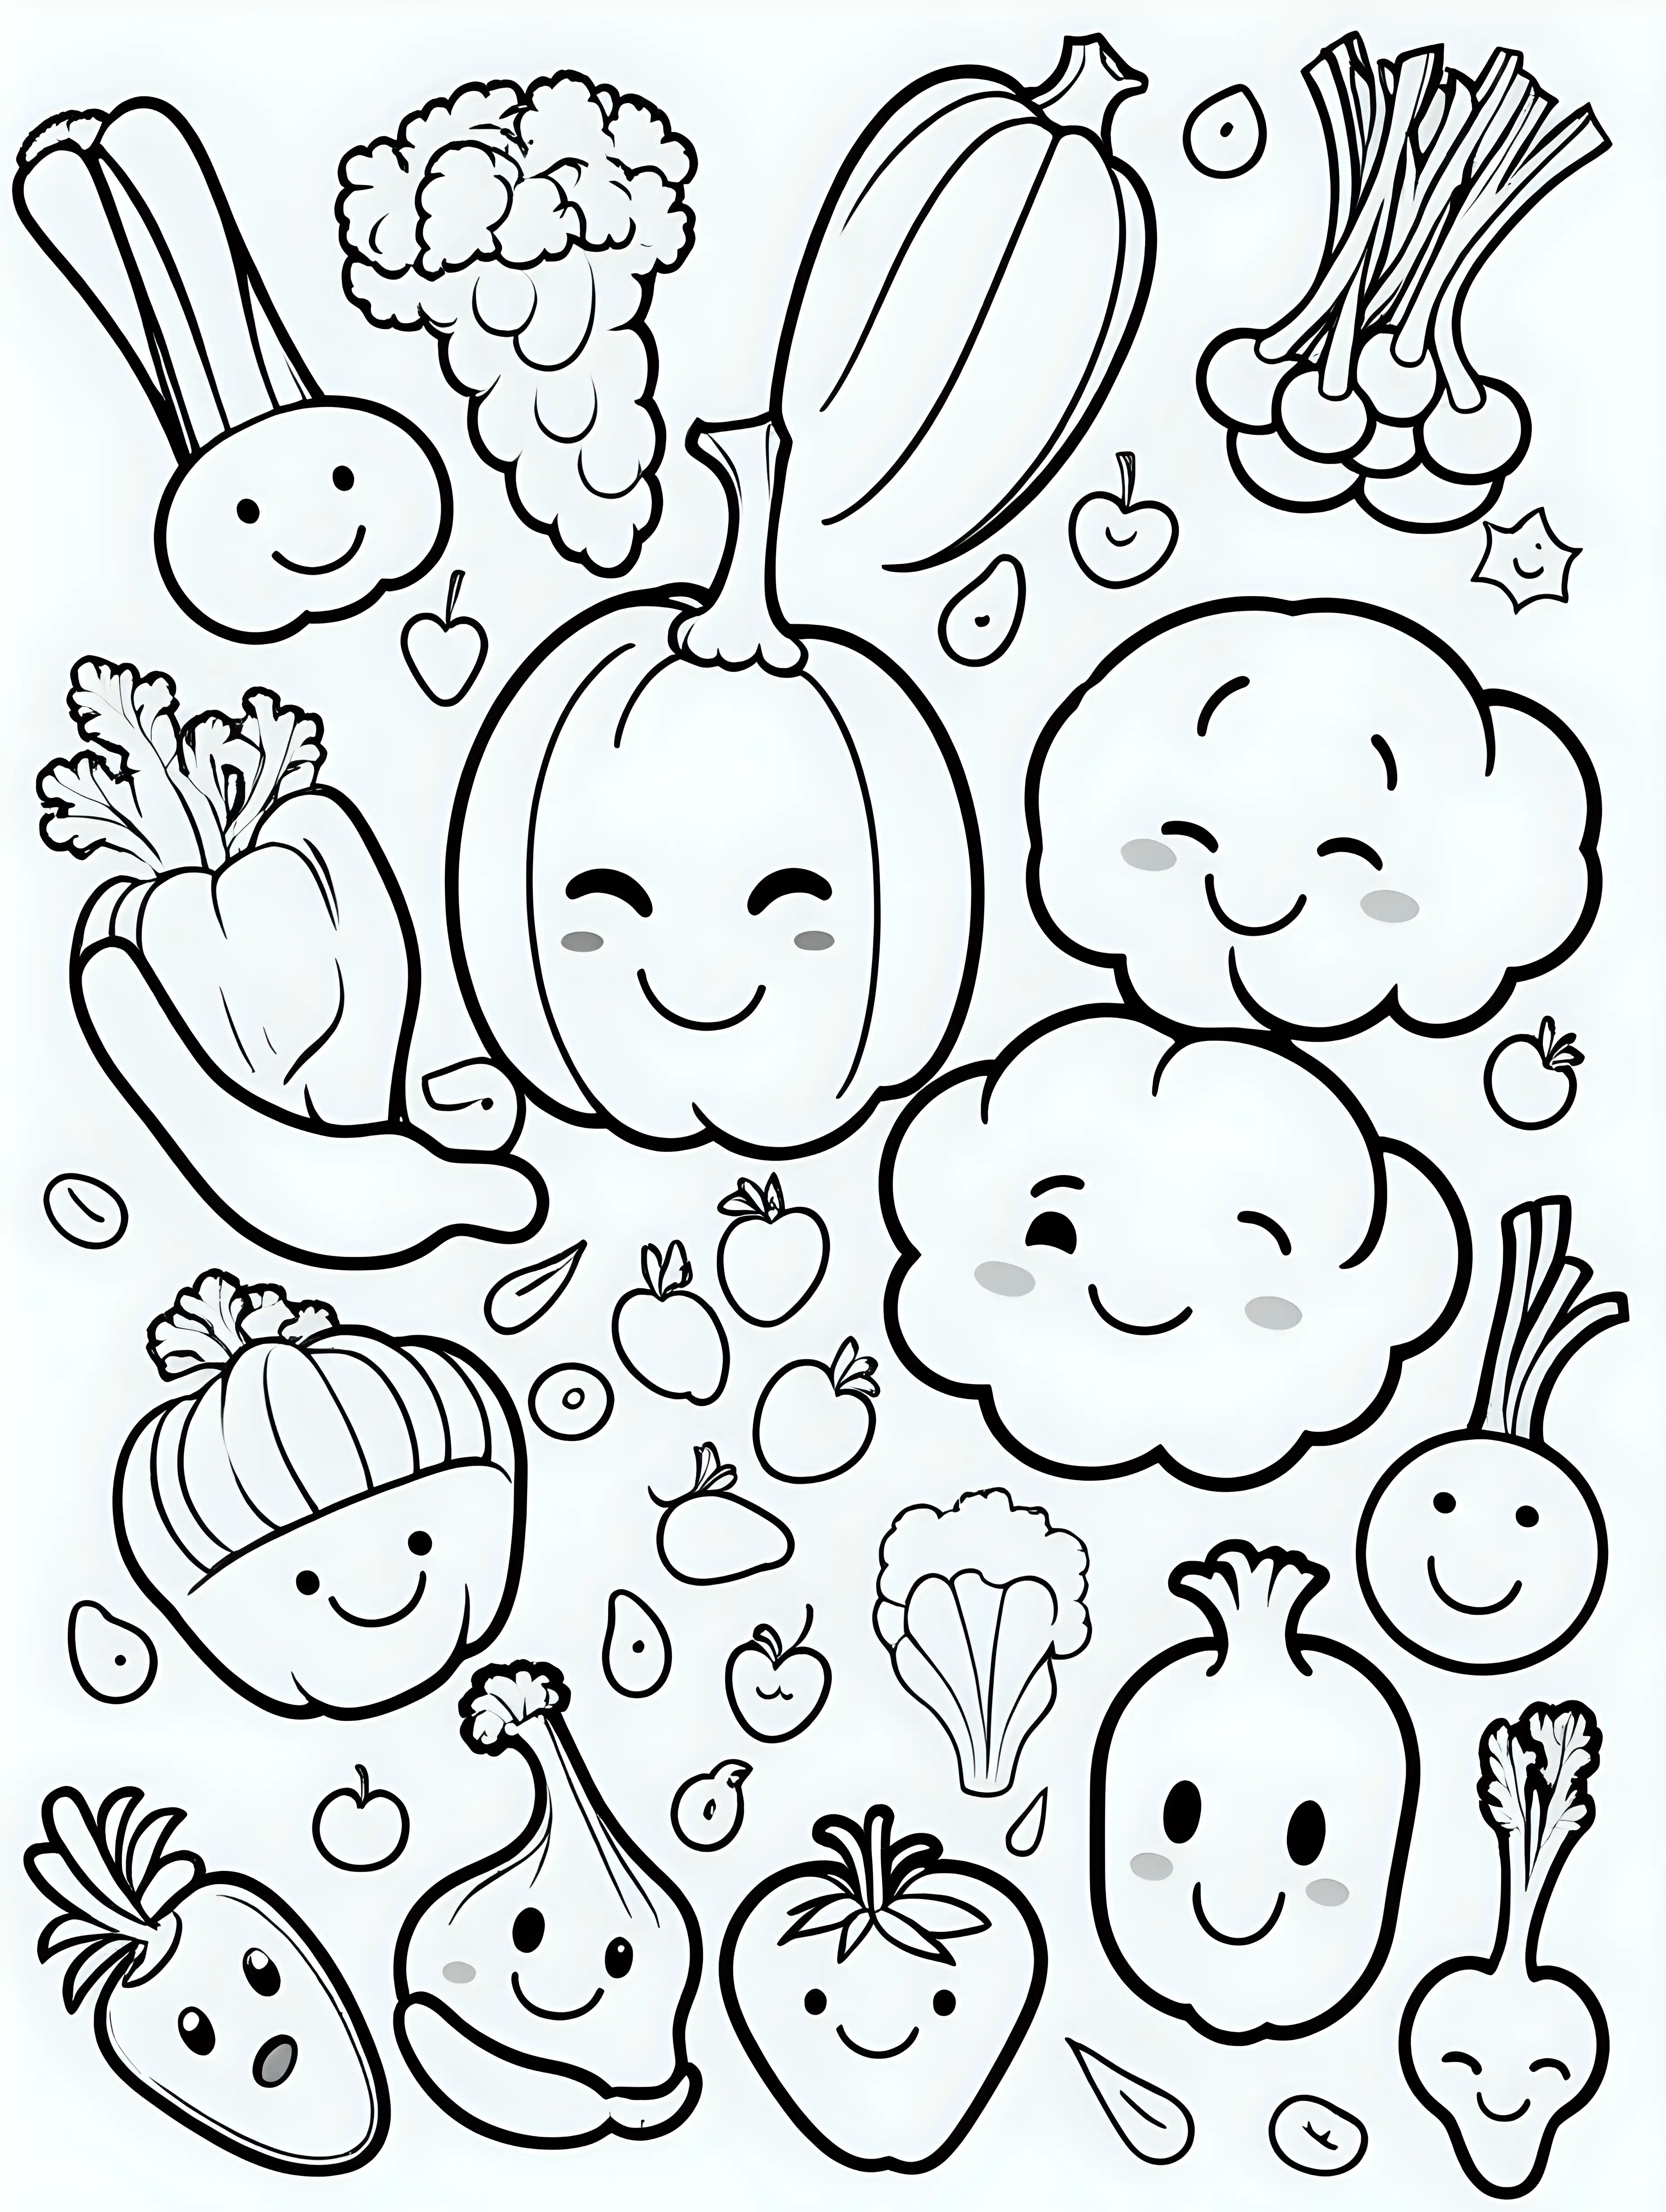 Adorable Vegetable Characters Playful Coloring Book Illustration